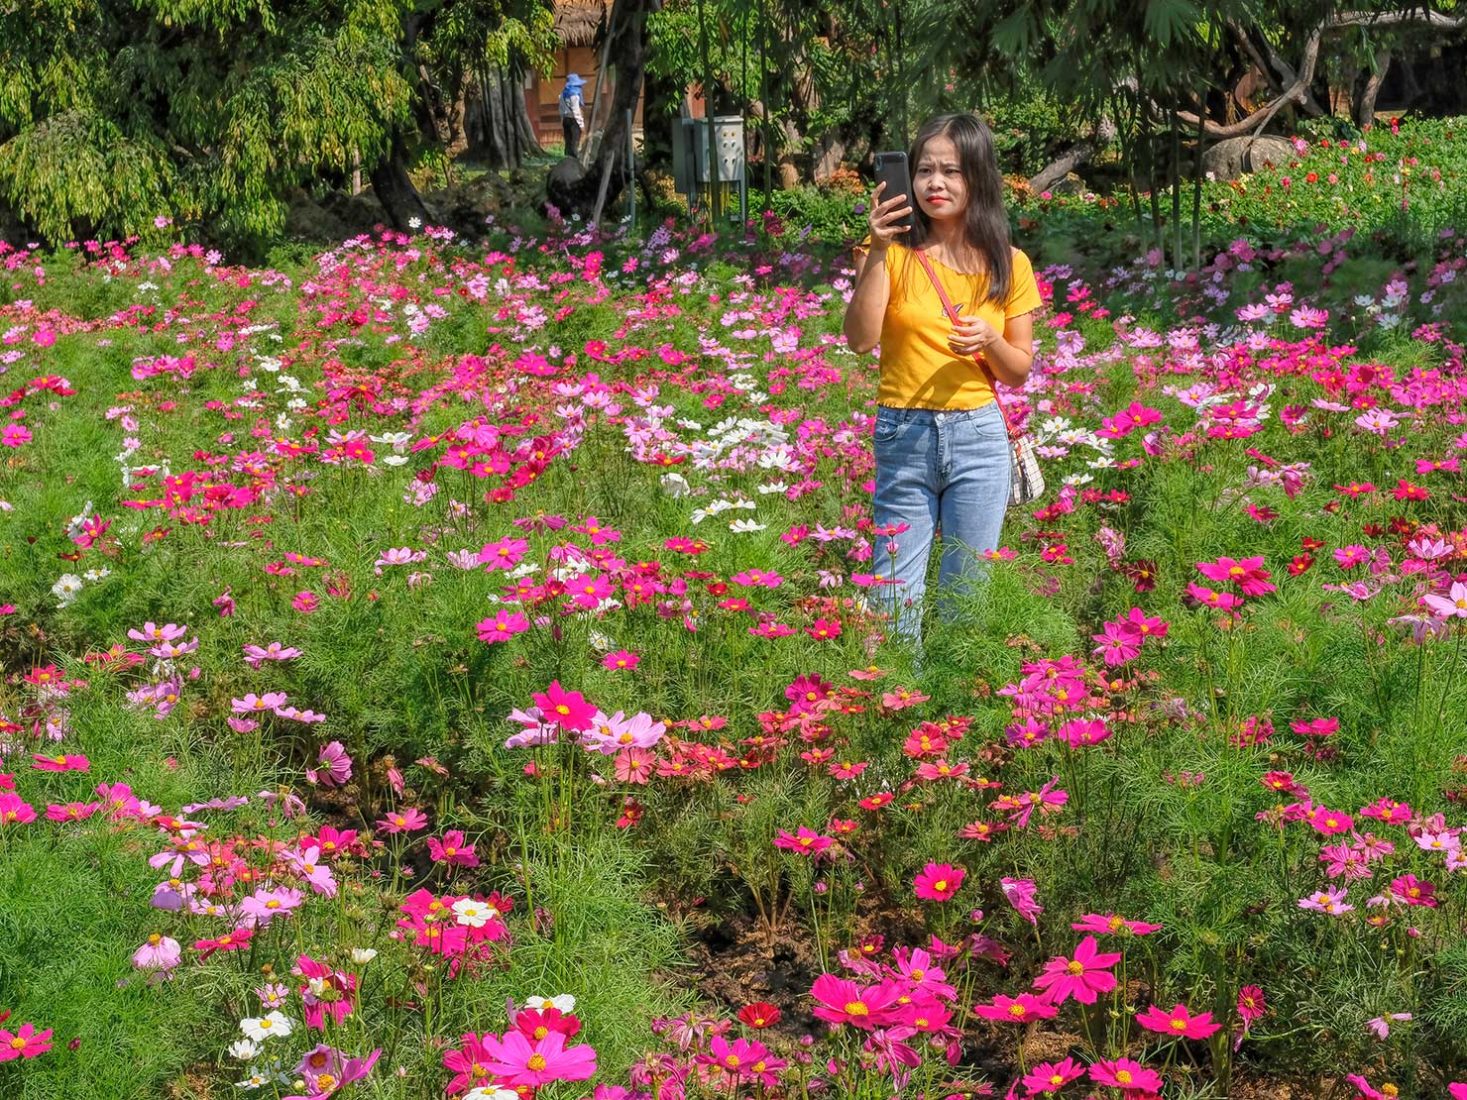 Field of hot pink Cosmos make for beautiful photos